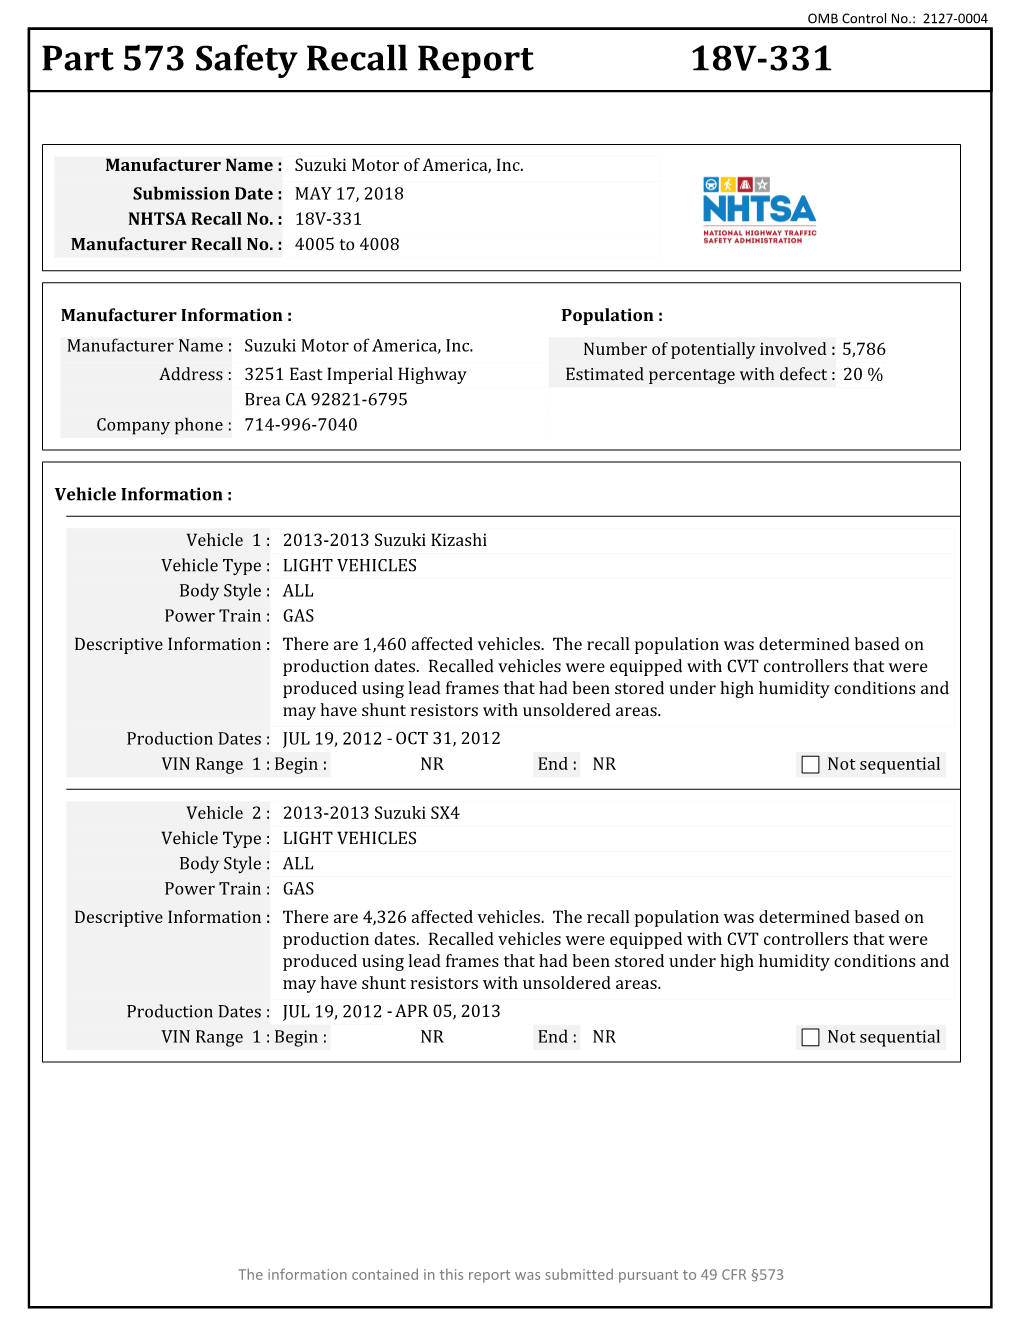 Part 573 Safety Recall Report 18V-331